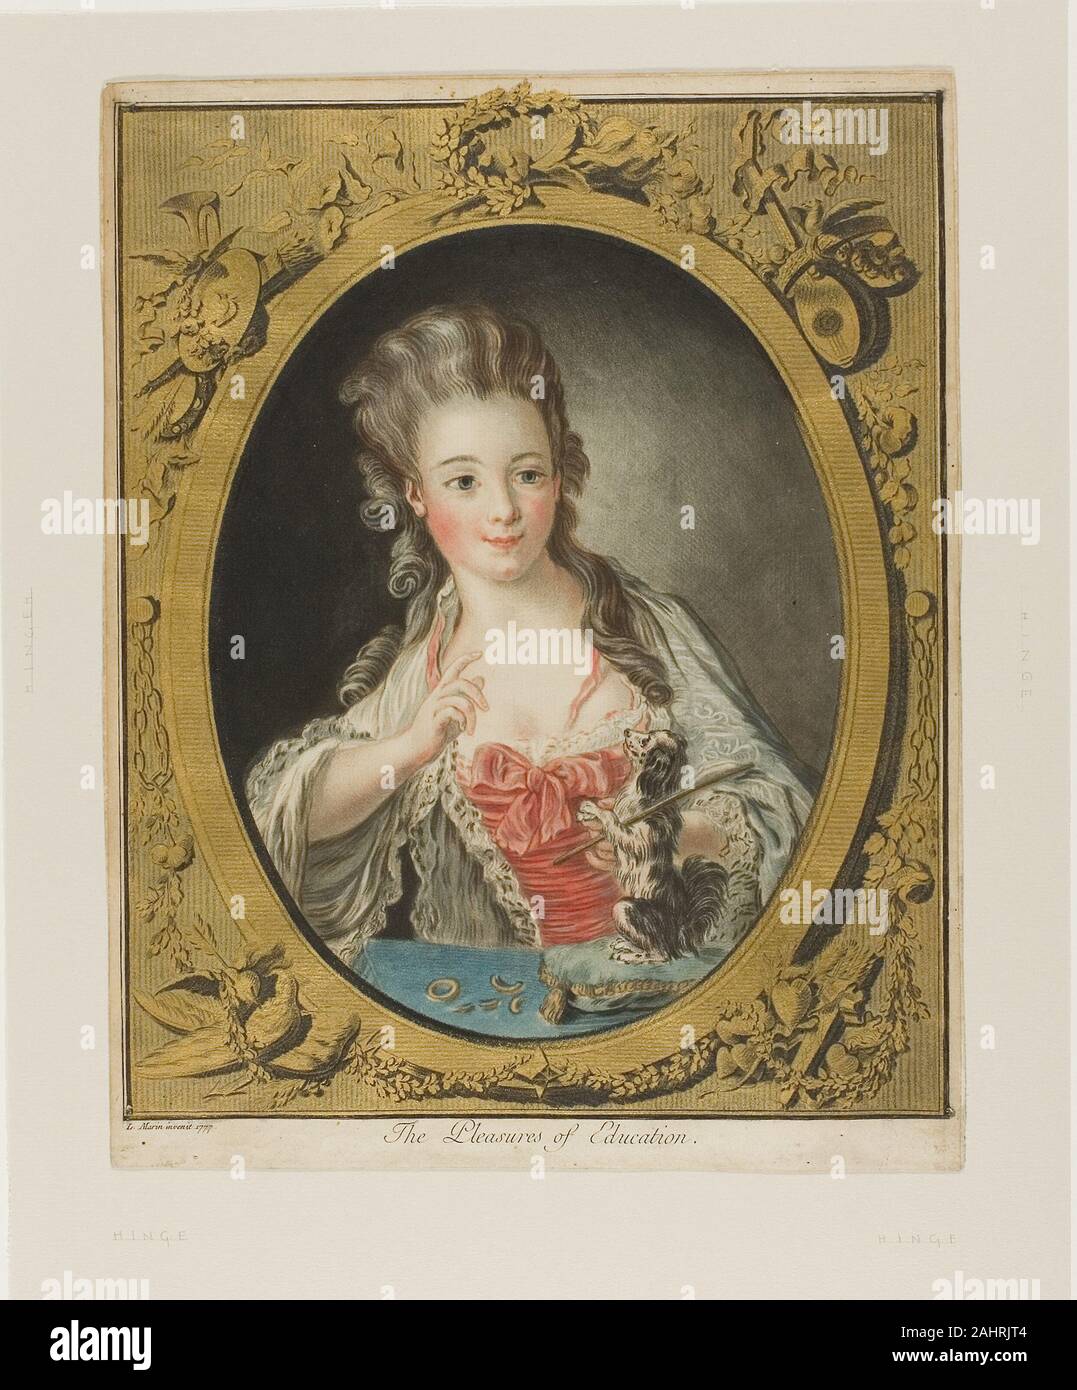 Louis-Marin Bonnet. The Pleasures of Education. 1777. France. Pastel-manner  engraving and etching in color, with gold leaf, on ivory laid paper  Louis-Marin Bonnet's color-printing repertoire included these variations on  the fashionable pastel